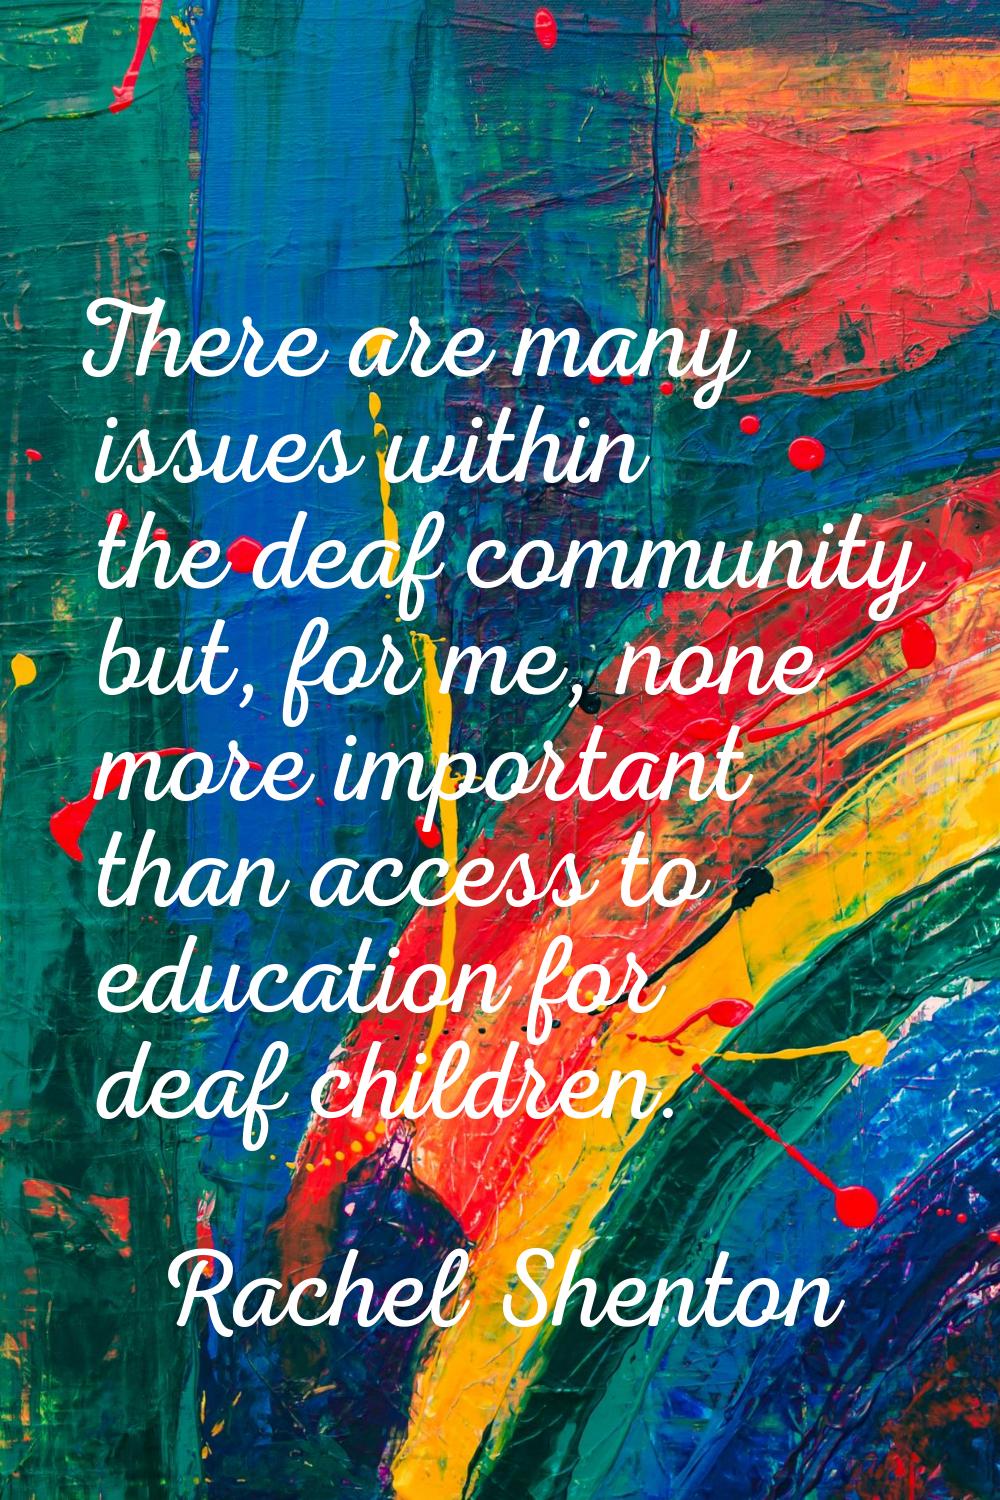 There are many issues within the deaf community but, for me, none more important than access to edu